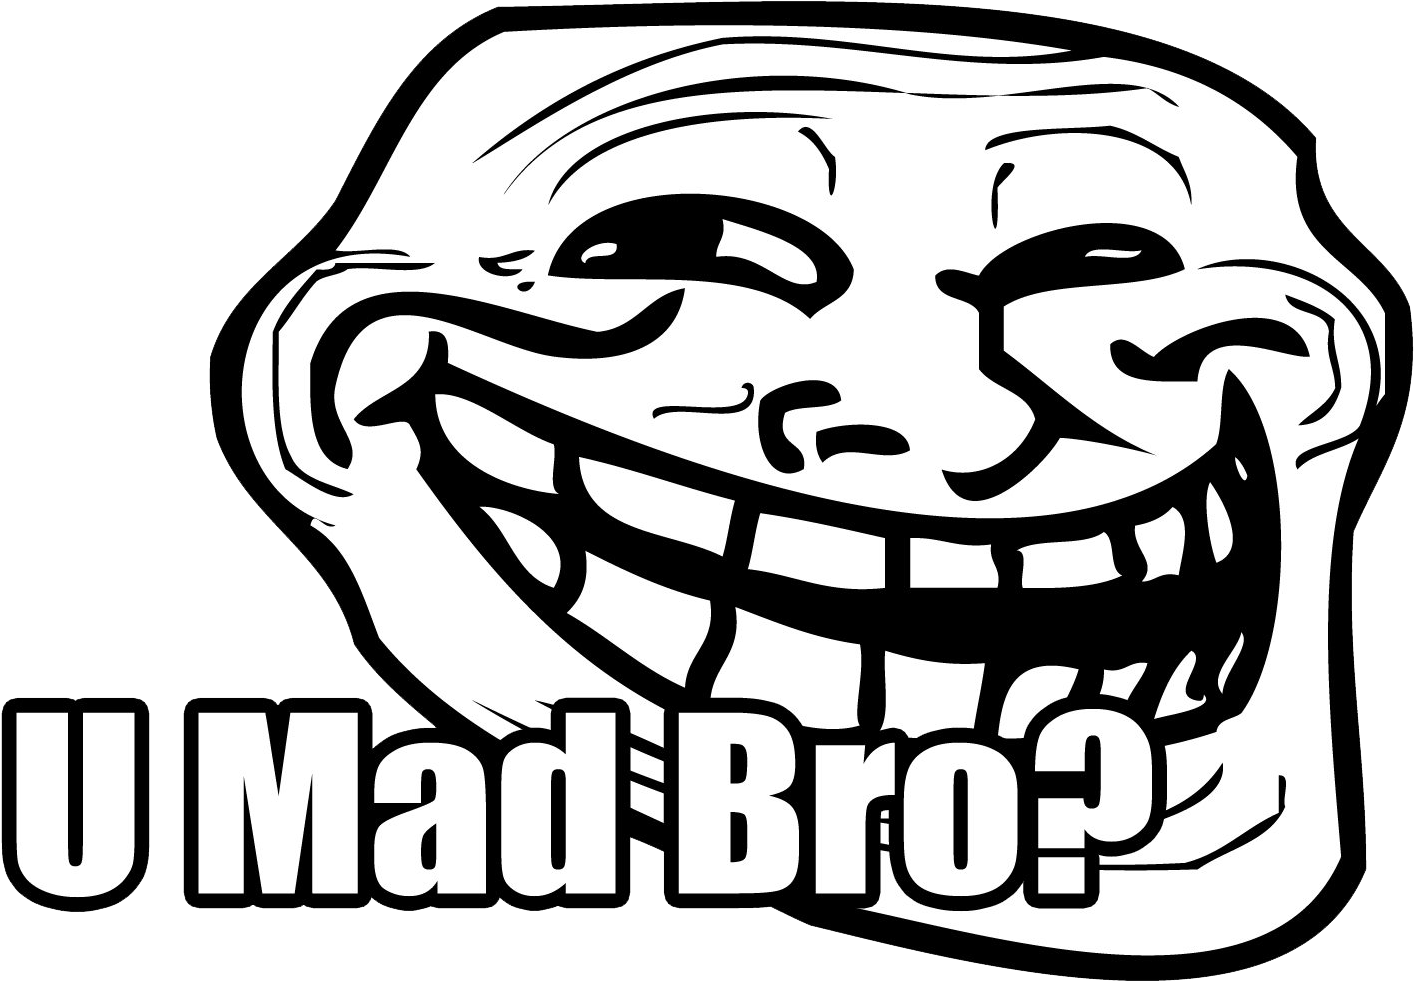 Troll Face PNG Image With Transparent Background png - Free PNG Images